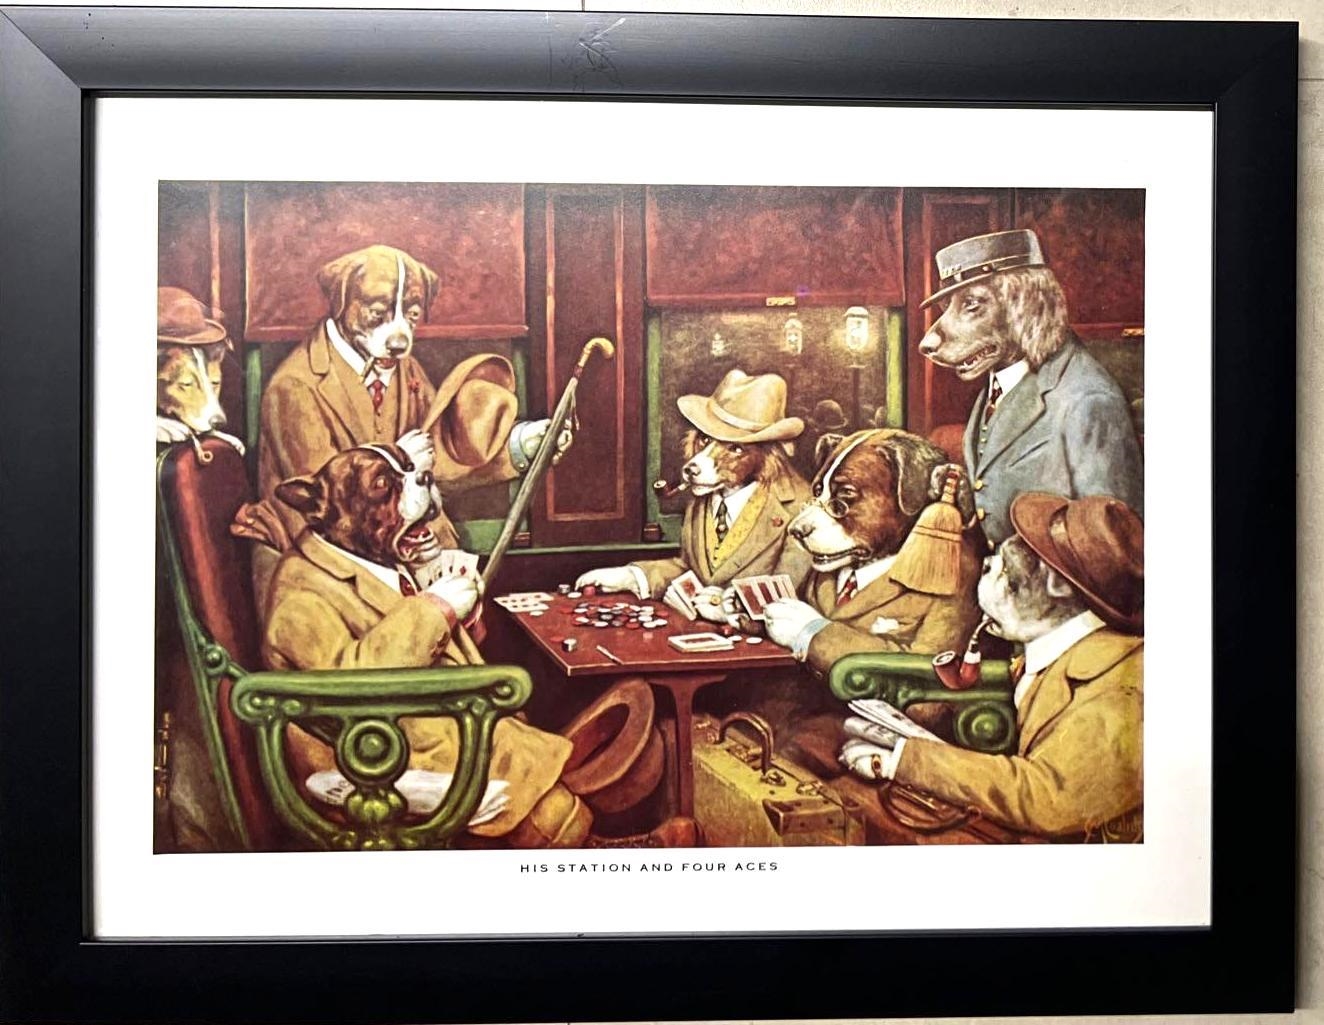 Very Rare Vintage Dogs Playing Poker C.M. Coolidge Framed Print Titled His Station and Four Aces - Cassius Marcellus Coolidge